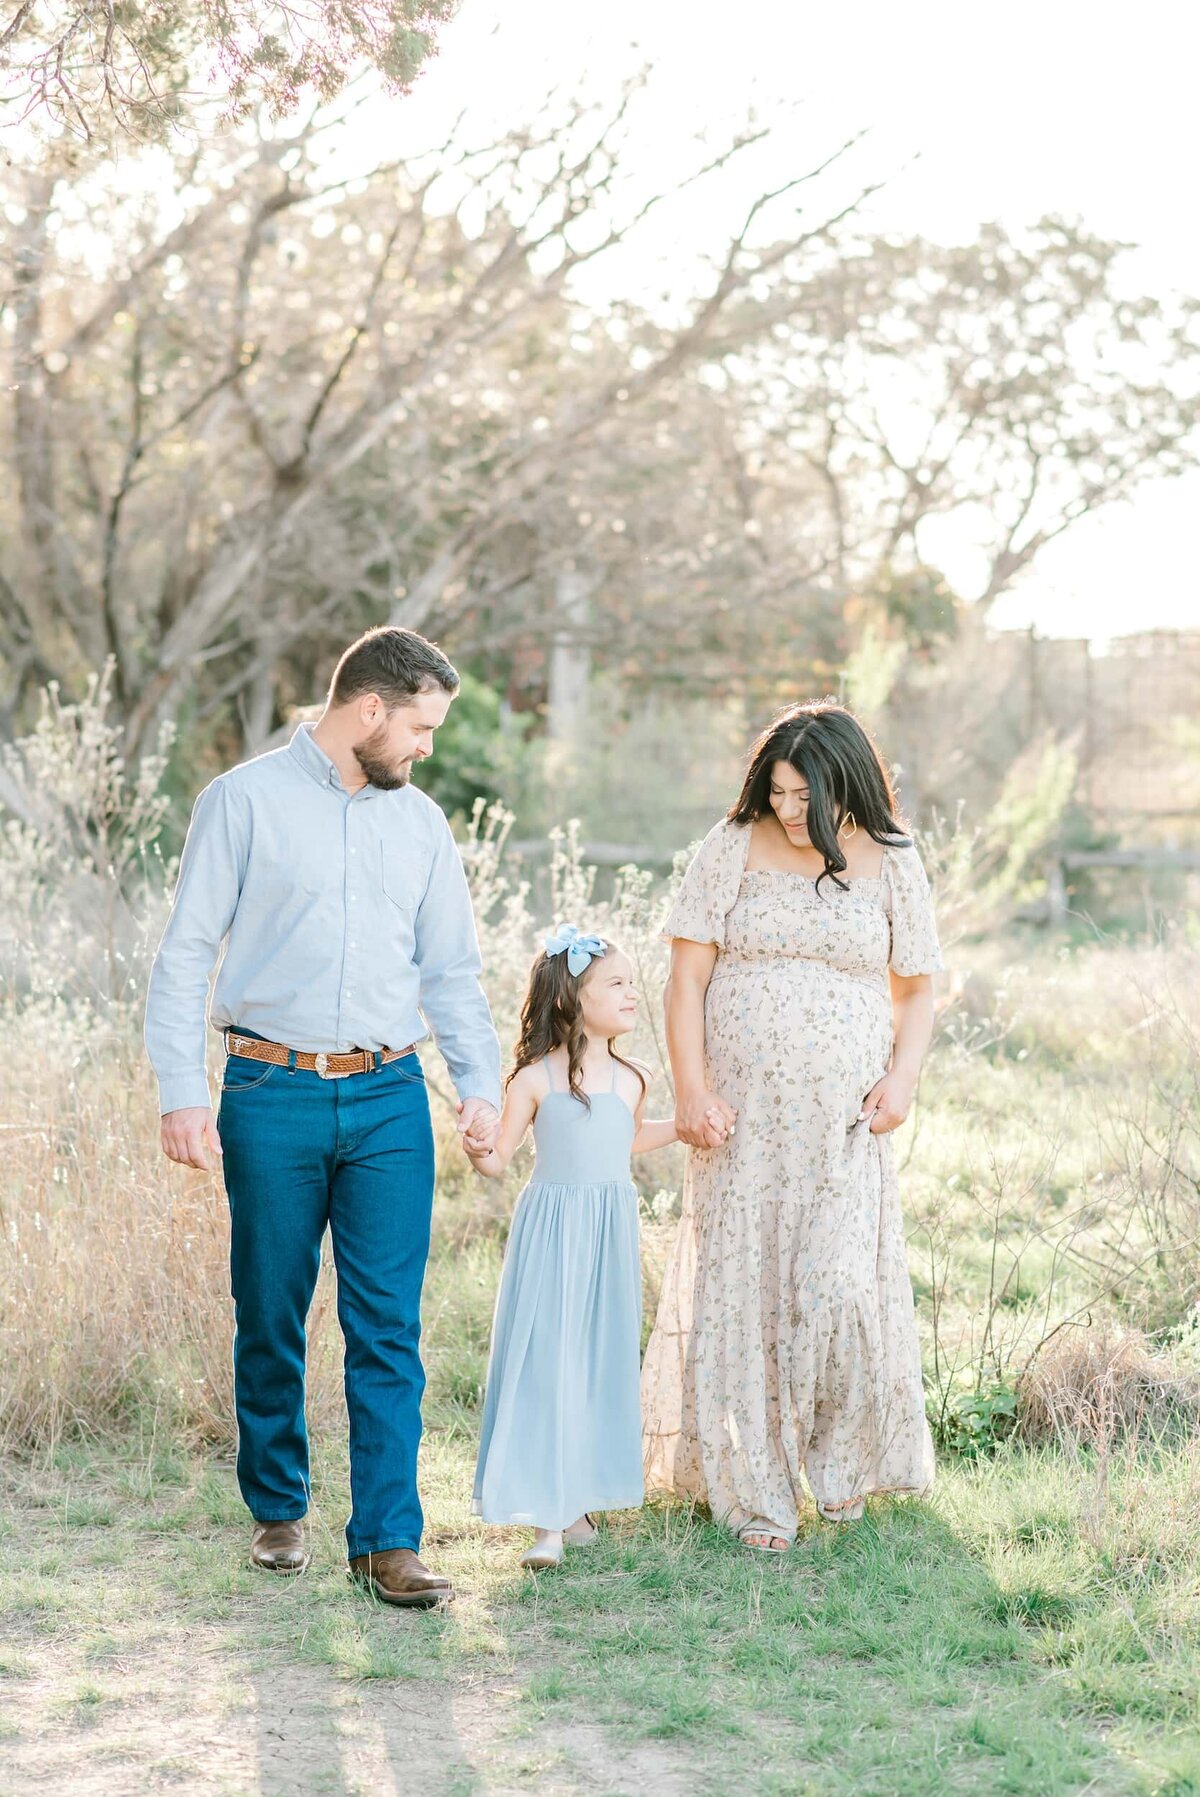 San-Antonio-Maternity-Photography-3.4.23- Melanie_s Maternity Session- Laurie Adalle Photography-8